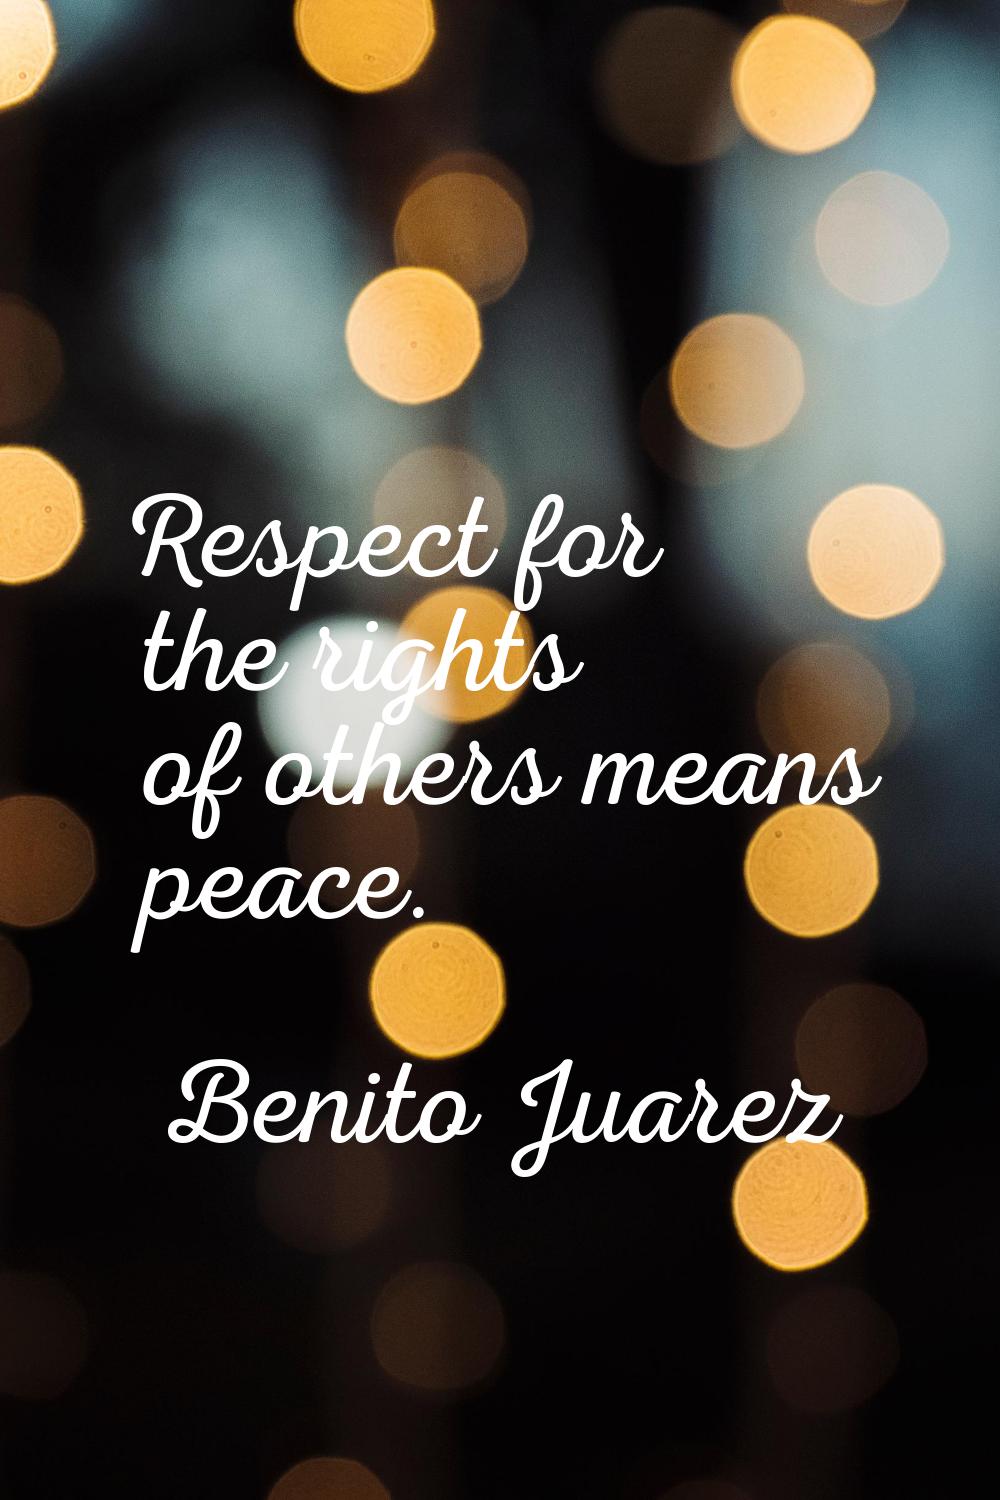 Respect for the rights of others means peace.